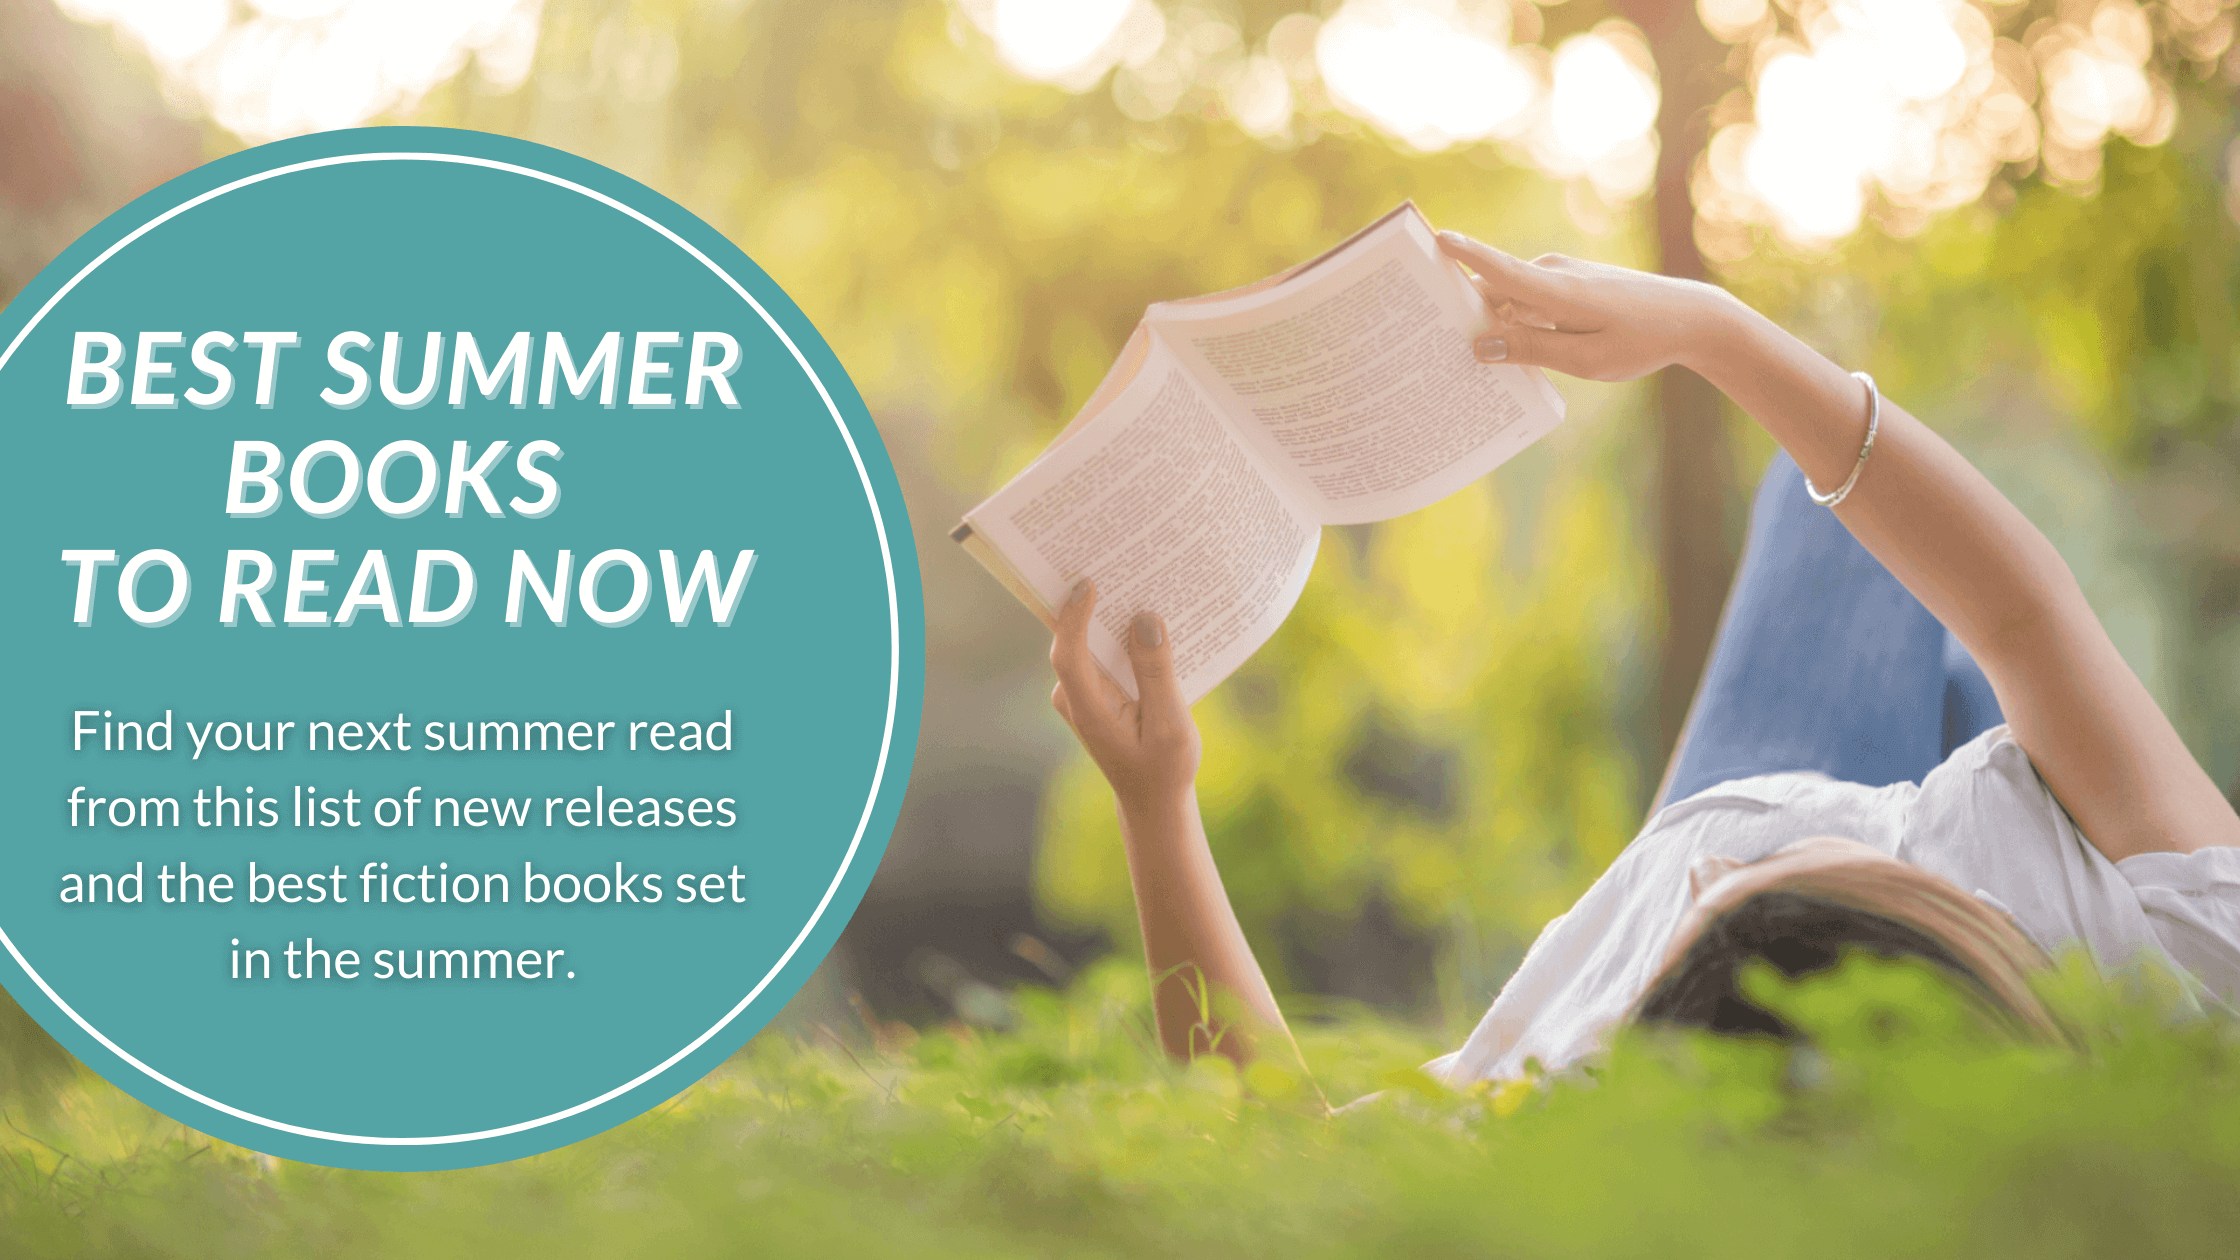 Best Summer Books to Read Now - Find your next summer read from this list of new releases and the best fiction books set in the summer.